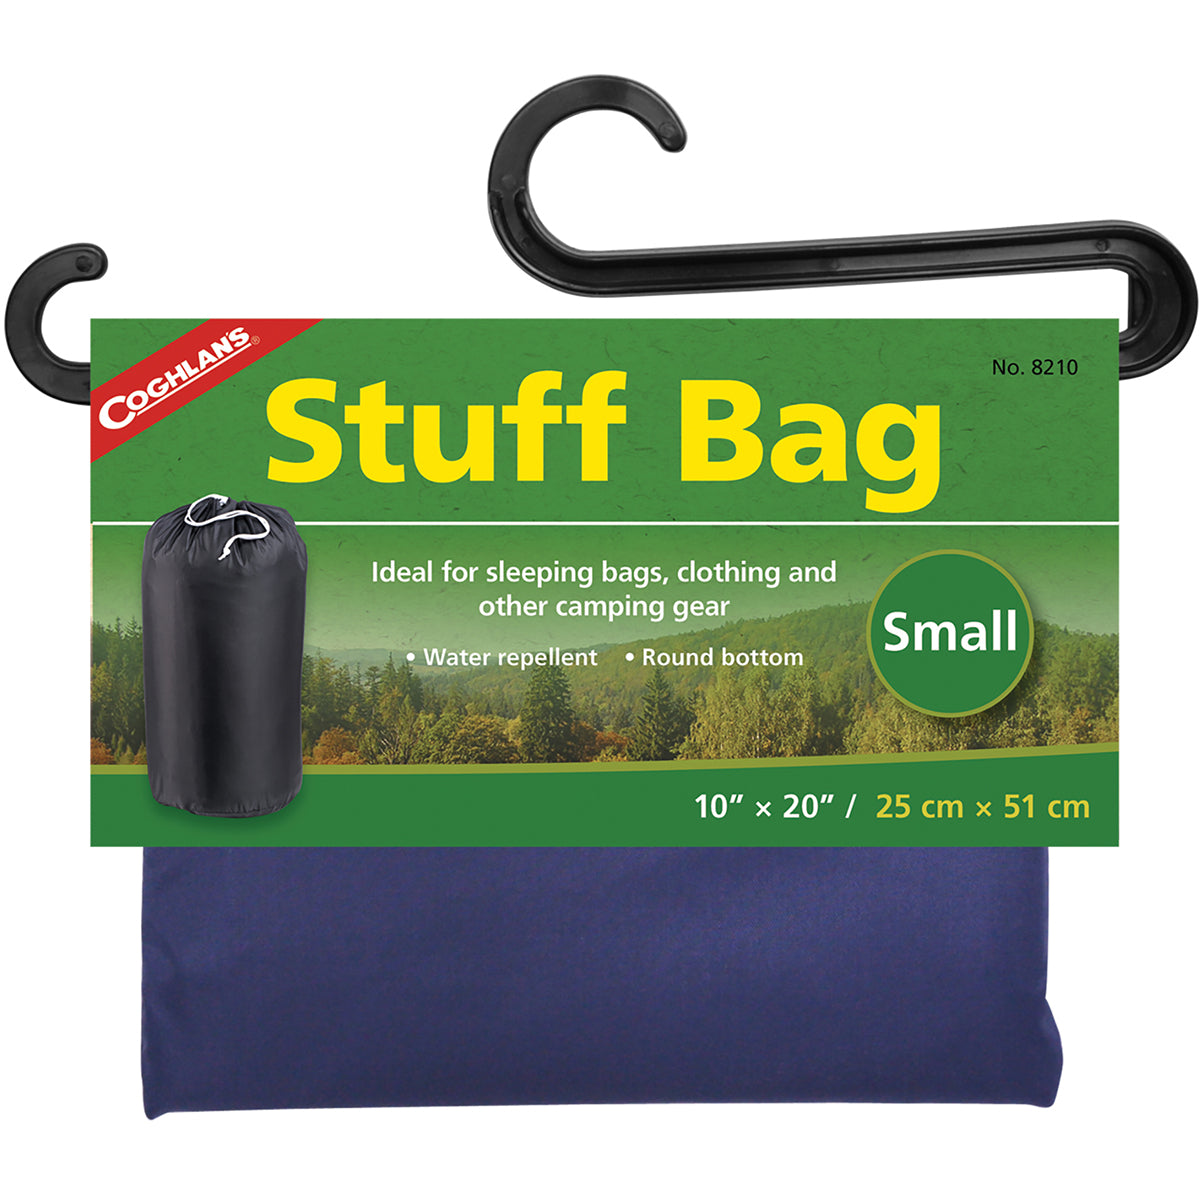 Coghlan's Stuff Bag, Ideal for Sleeping Bags, Clothing, and Other Camping Gear Coghlan's